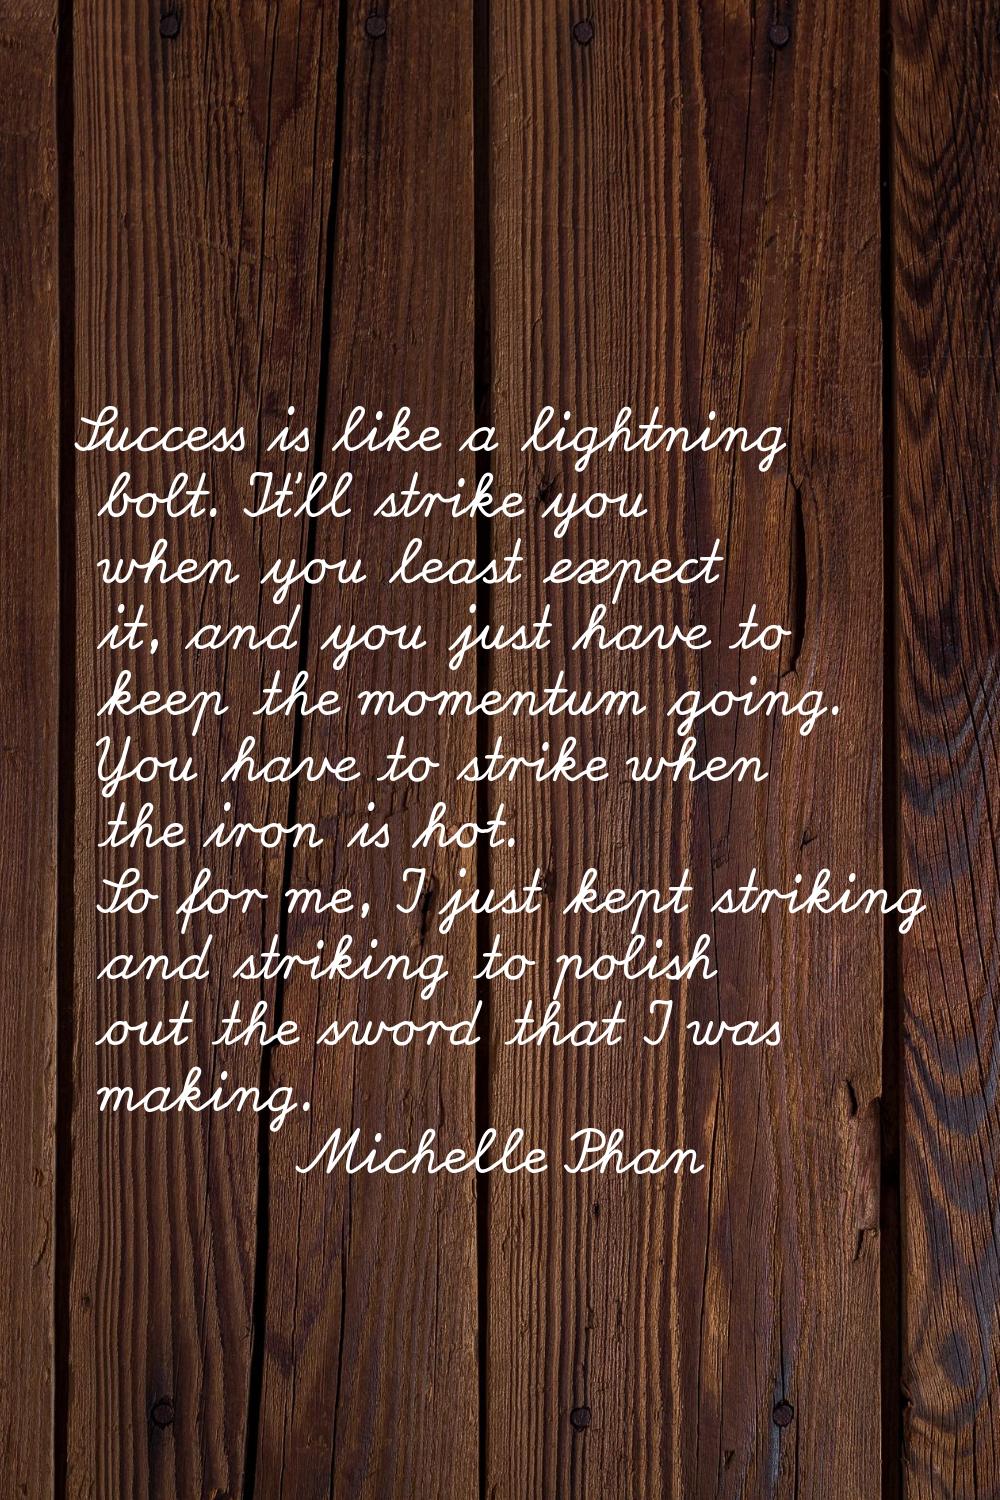 Success is like a lightning bolt. It'll strike you when you least expect it, and you just have to k